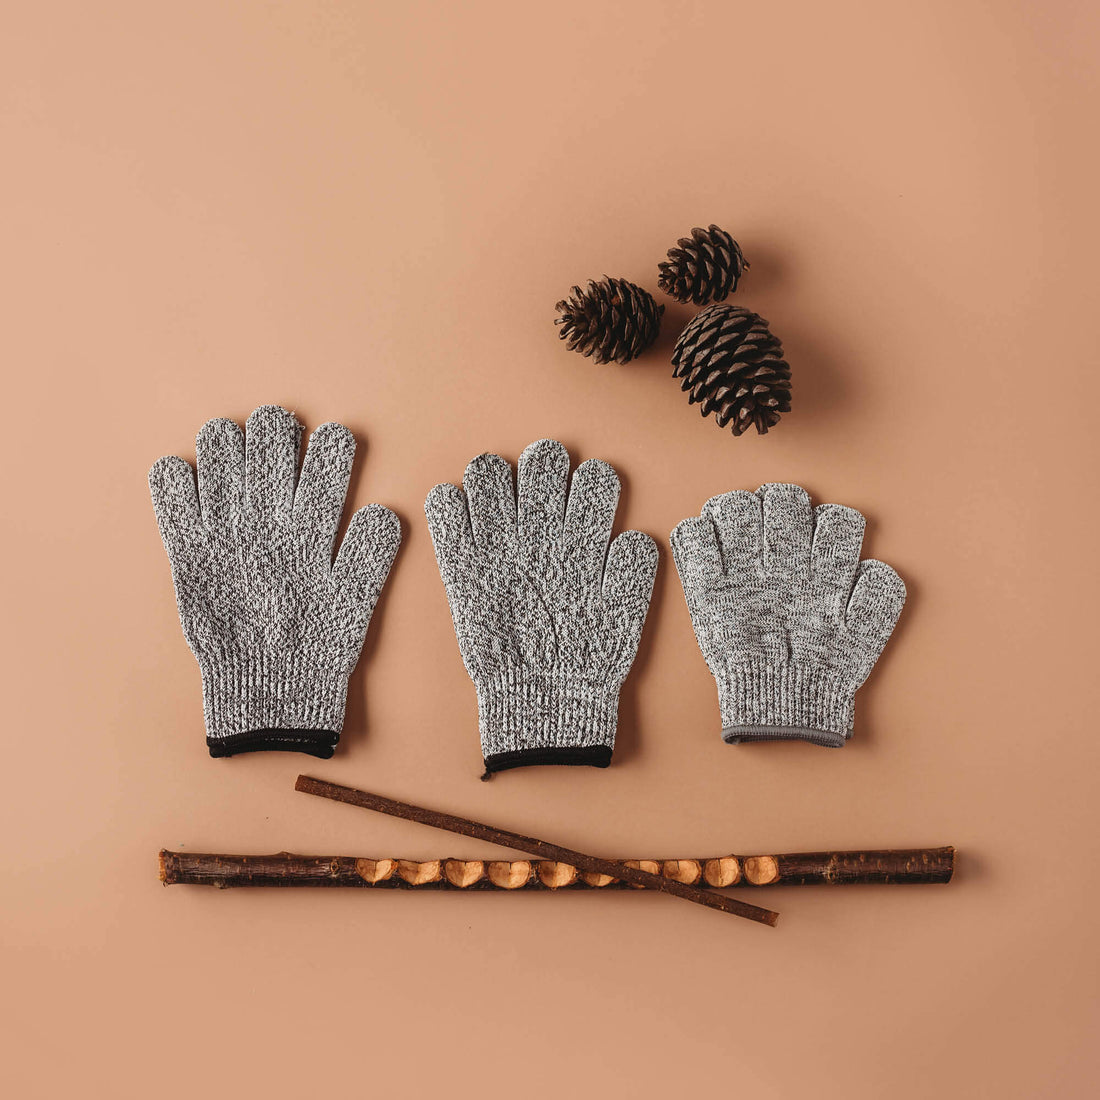 Cut resistant gloves for kids when doing wood whittling and using other tools for nature craft, from Your Wild Books. Level 5 HPPE protection.